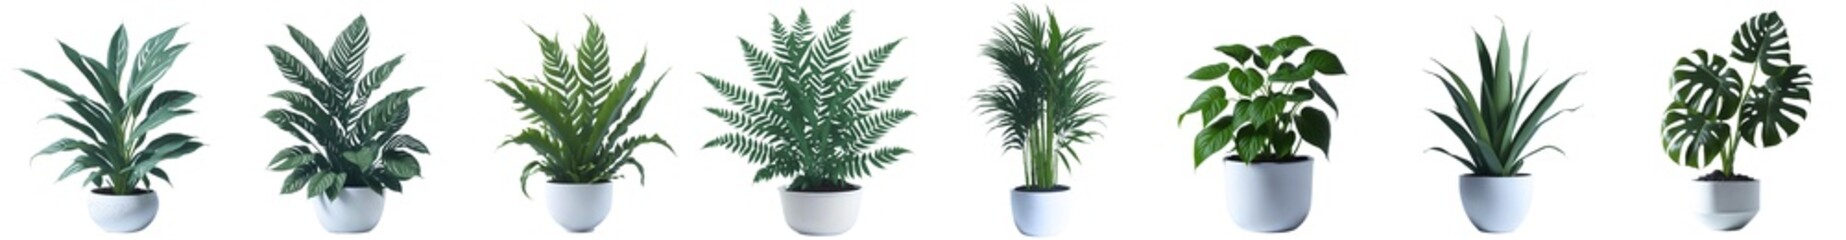 8 kind of Home Decor plants in white ceramic pots isolated on transparent background. 3D rendering.